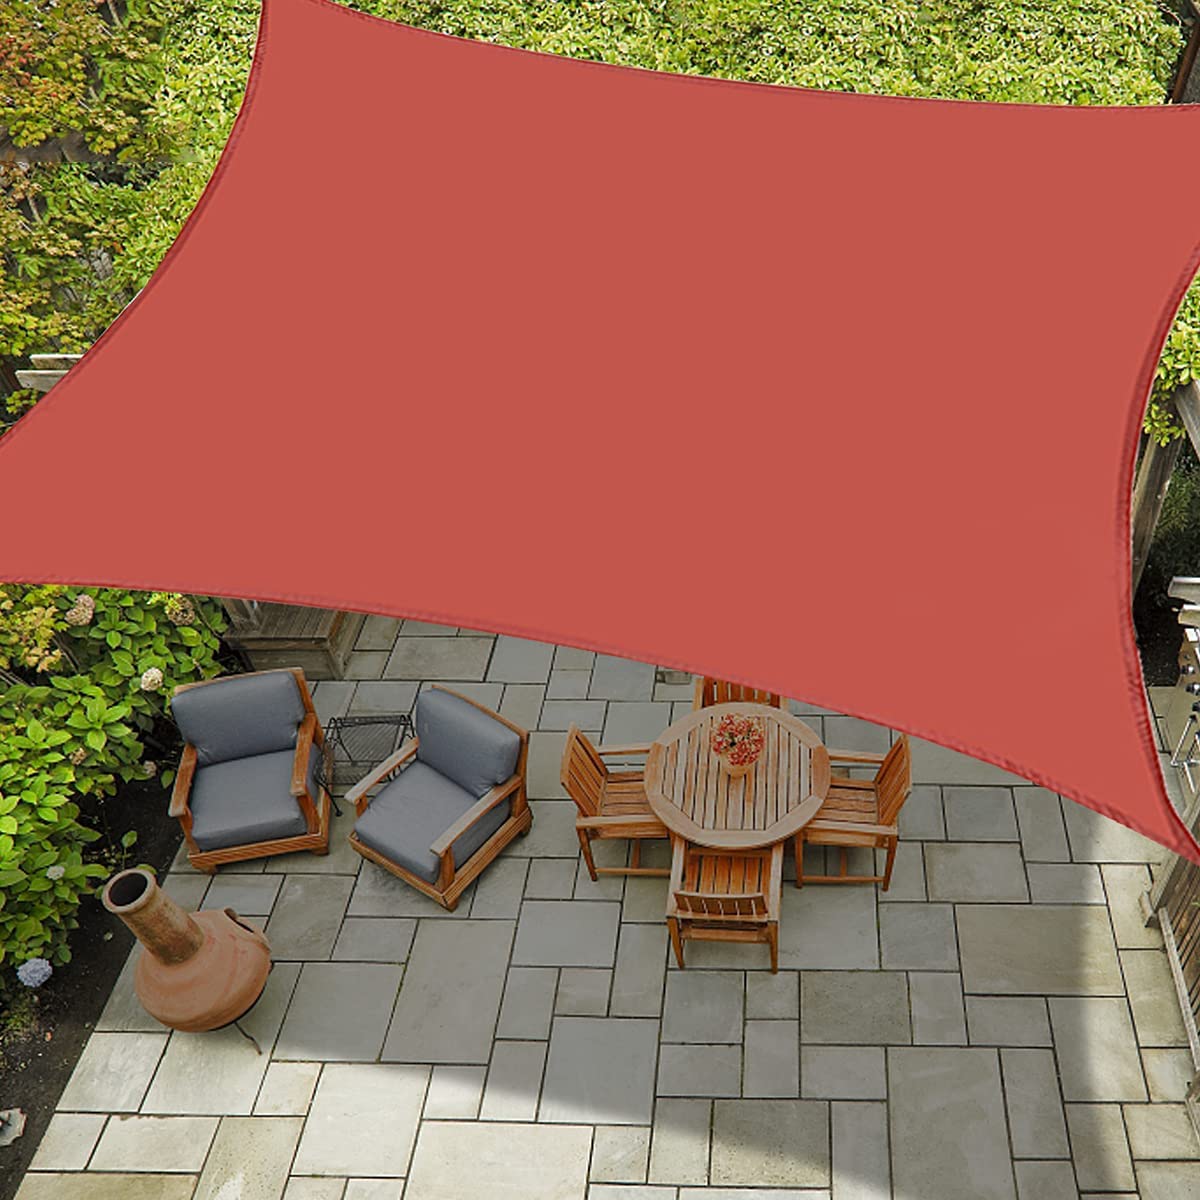 Fade Resistant Outdoor Waterproof Rectangle Sun Shade Sail for Patio KGORGE Store